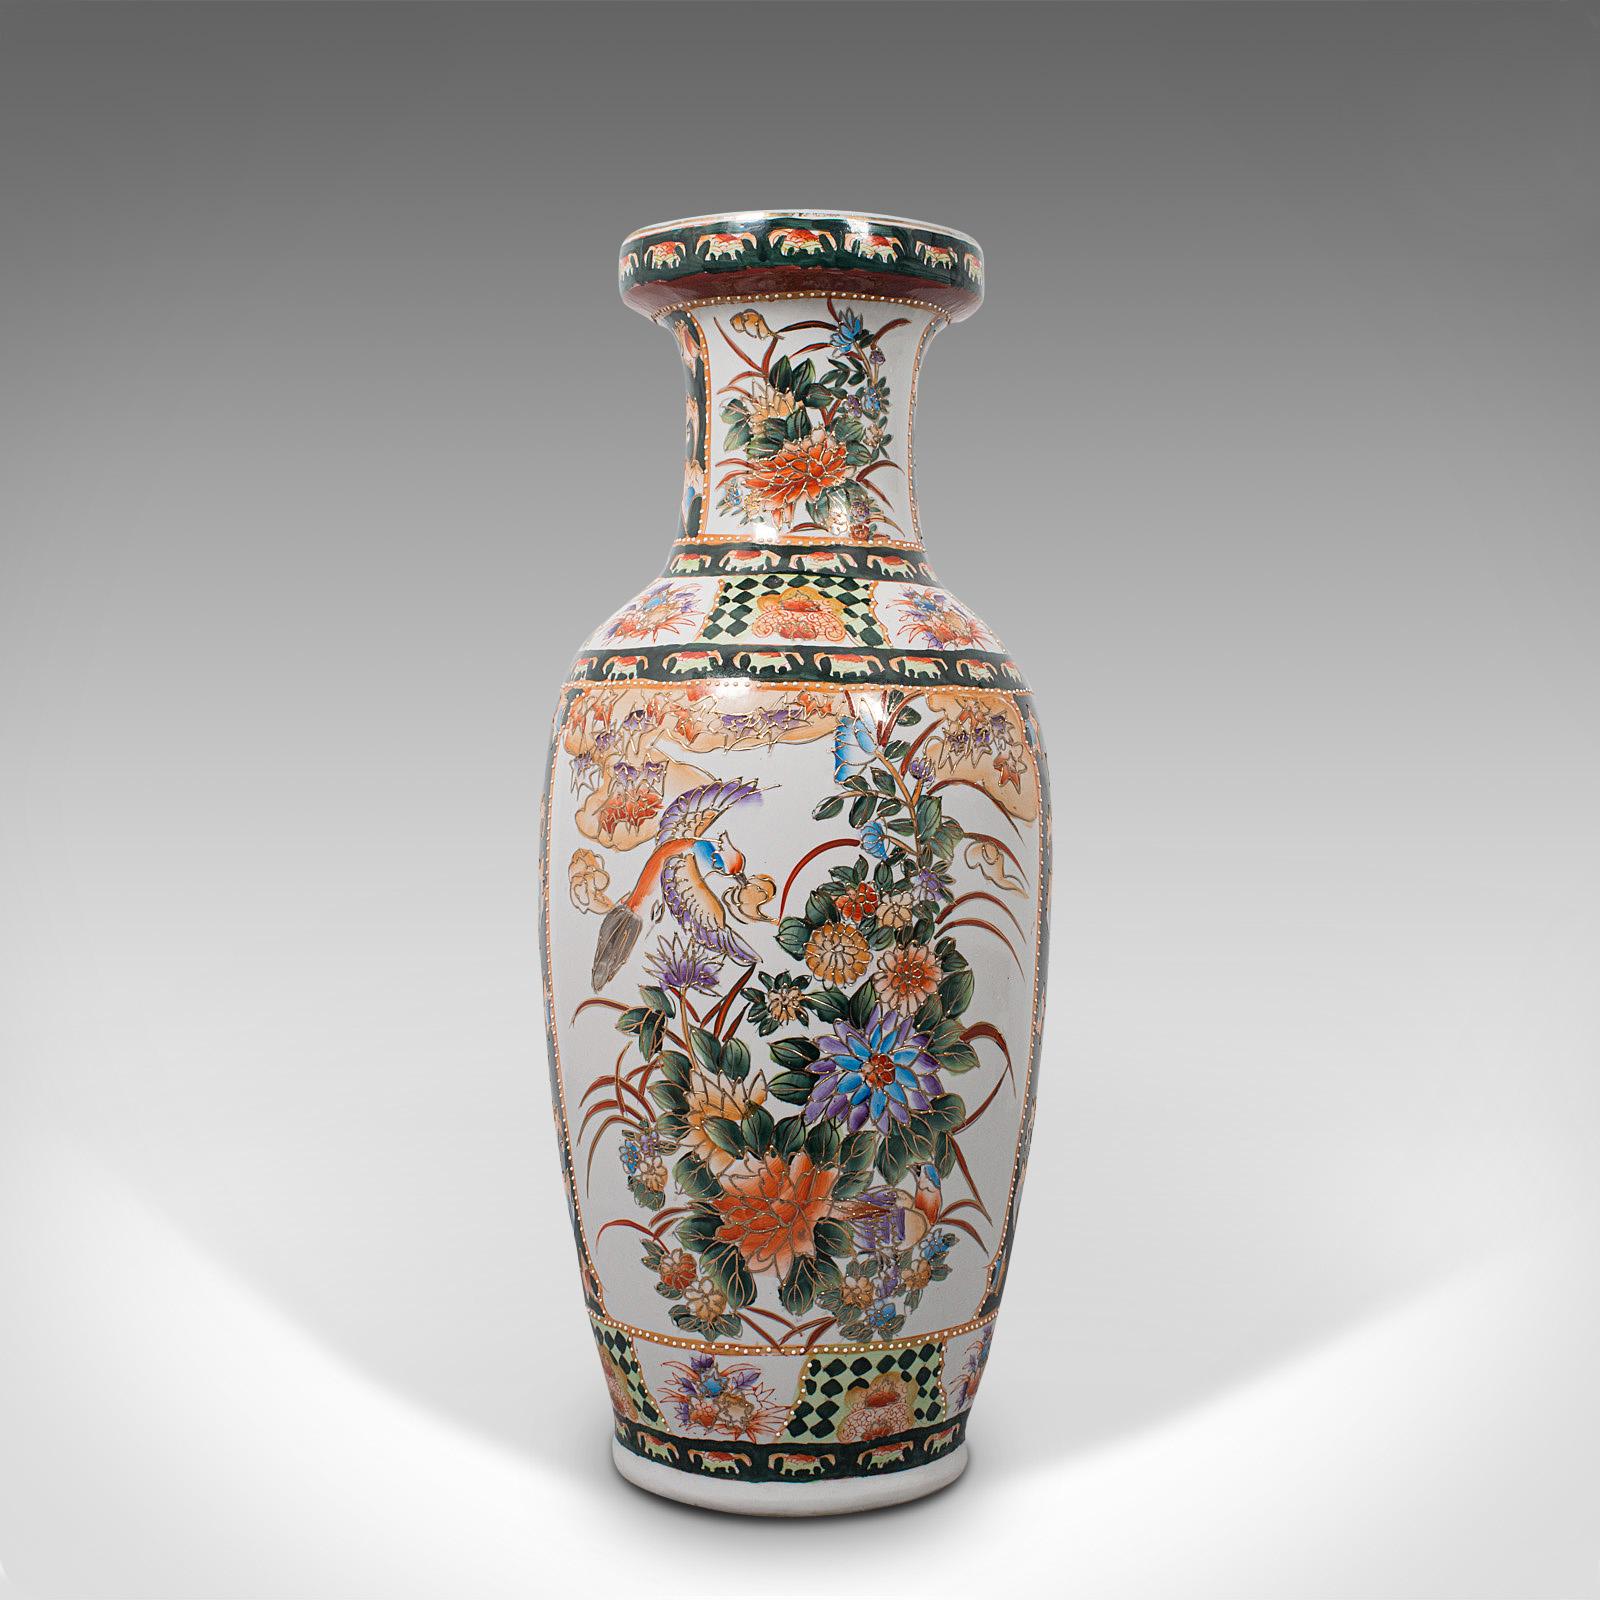 This is a tall vintage decorative flower vase. An Oriental, quality ceramic baluster urn with Art Deco taste, dating to the mid-20th century, circa 1940.

Appealingly colorful and of impressive proportion
Displaying a desirable aged